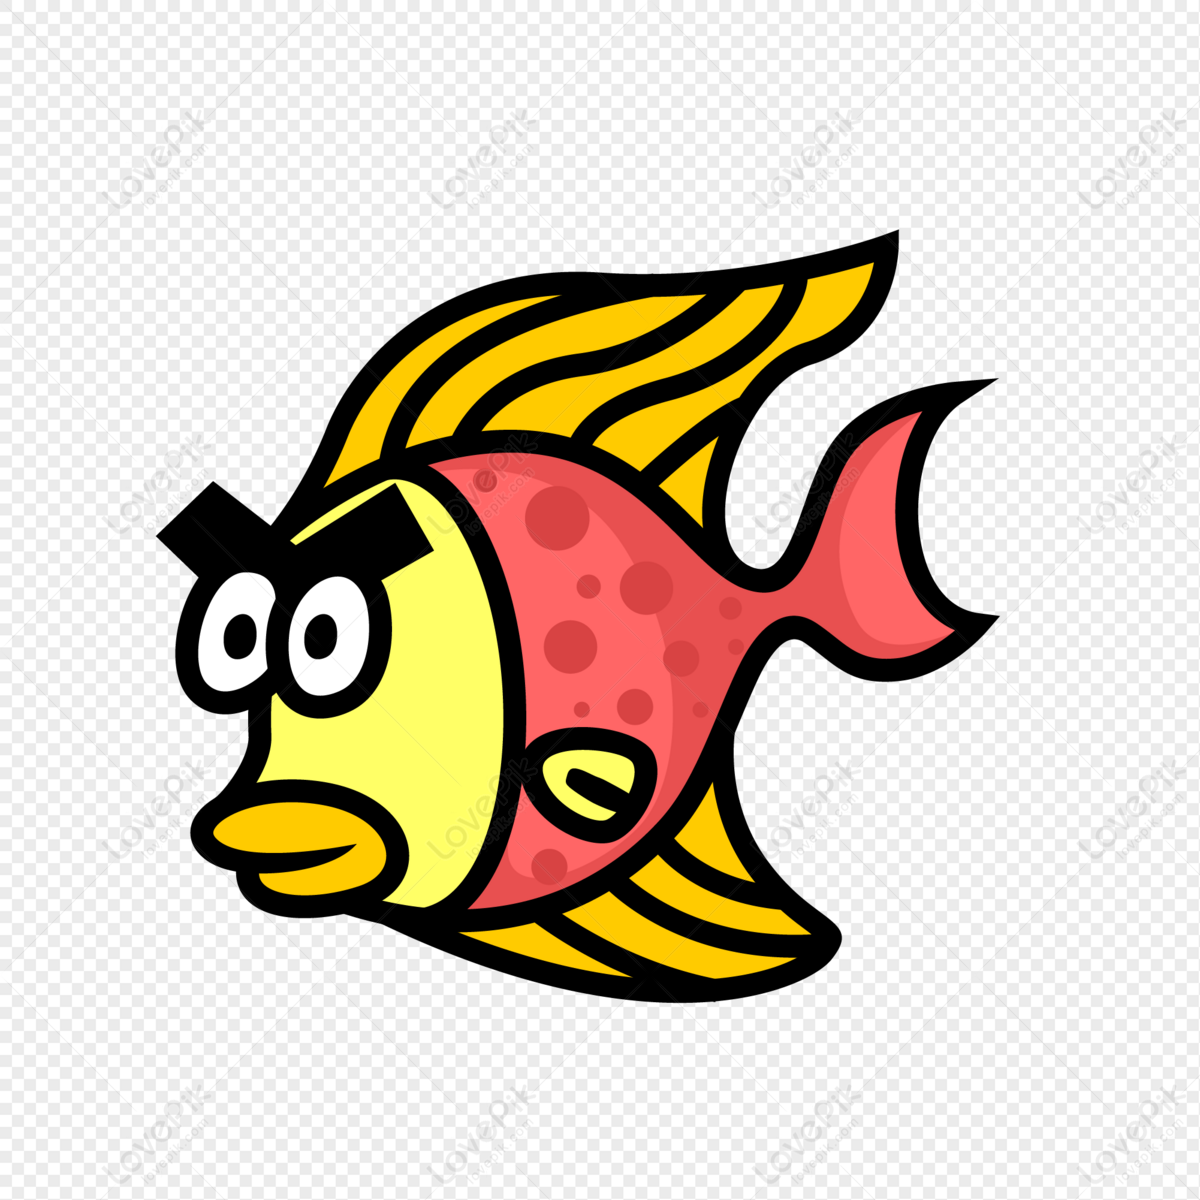 Fish, Fish Yellow, Cartoon Fish, Fish PNG Picture And Clipart Image For Free  Download - Lovepik